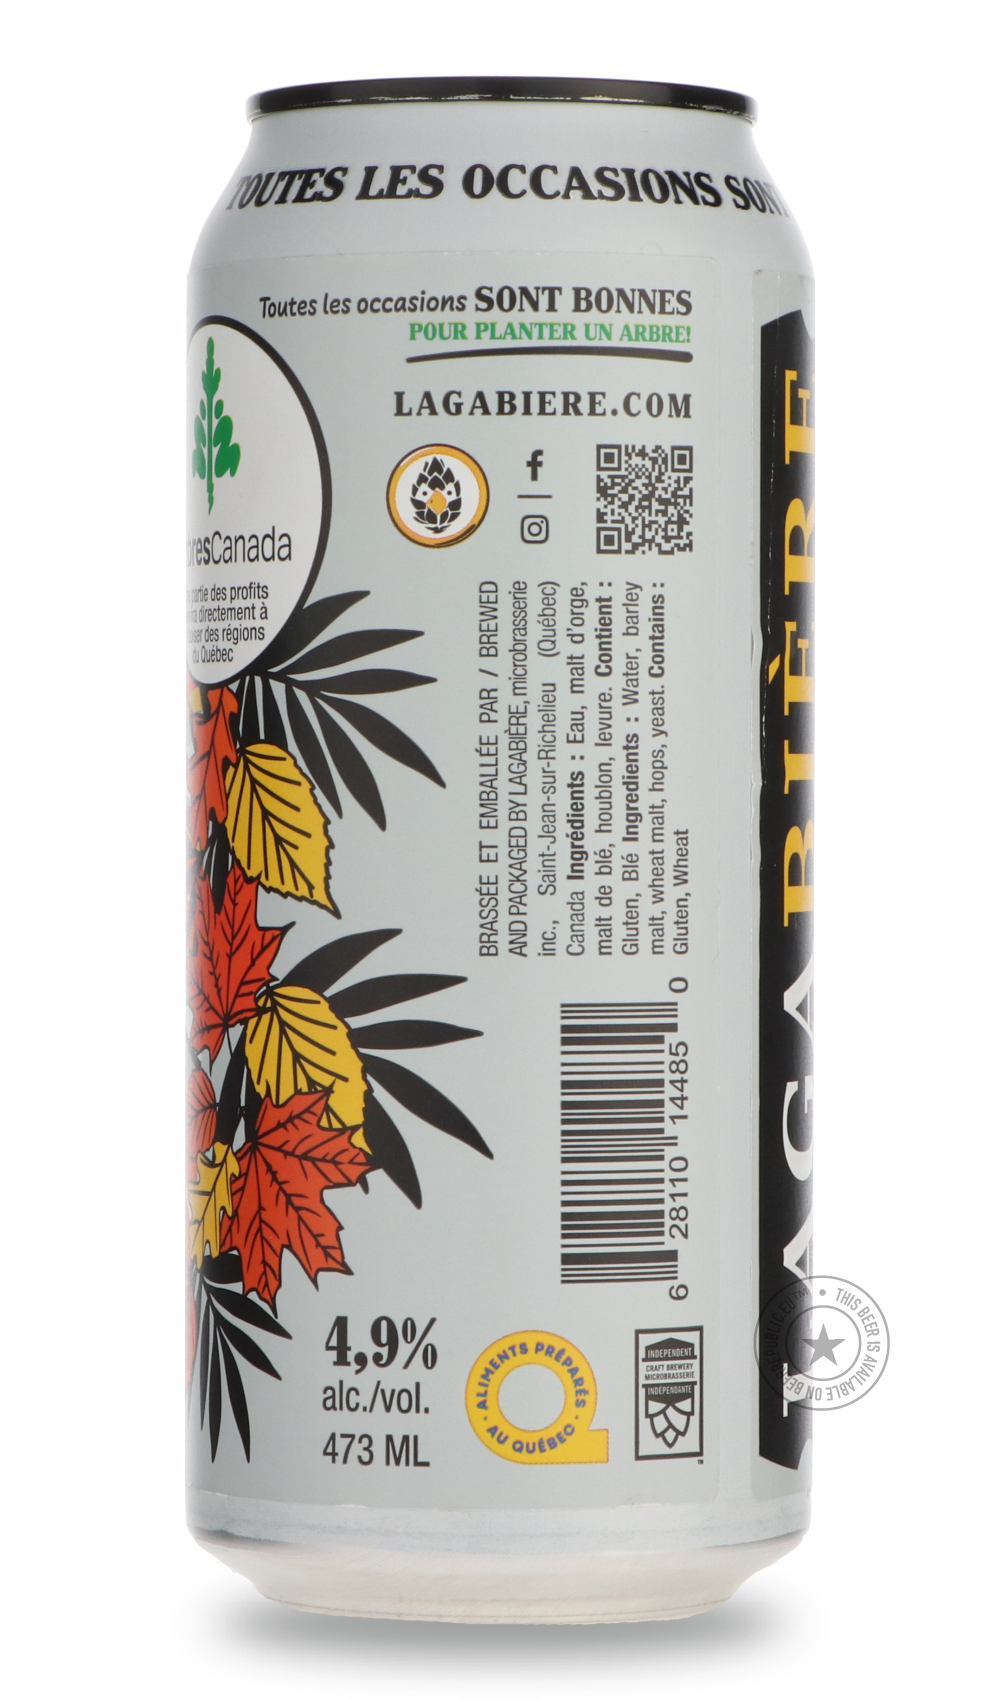 -Lagabière- LagaRousse-Brown & Dark- Only @ Beer Republic - The best online beer store for American & Canadian craft beer - Buy beer online from the USA and Canada - Bier online kopen - Amerikaans bier kopen - Craft beer store - Craft beer kopen - Amerikanisch bier kaufen - Bier online kaufen - Acheter biere online - IPA - Stout - Porter - New England IPA - Hazy IPA - Imperial Stout - Barrel Aged - Barrel Aged Imperial Stout - Brown - Dark beer - Blond - Blonde - Pilsner - Lager - Wheat - Weizen - Amber - B